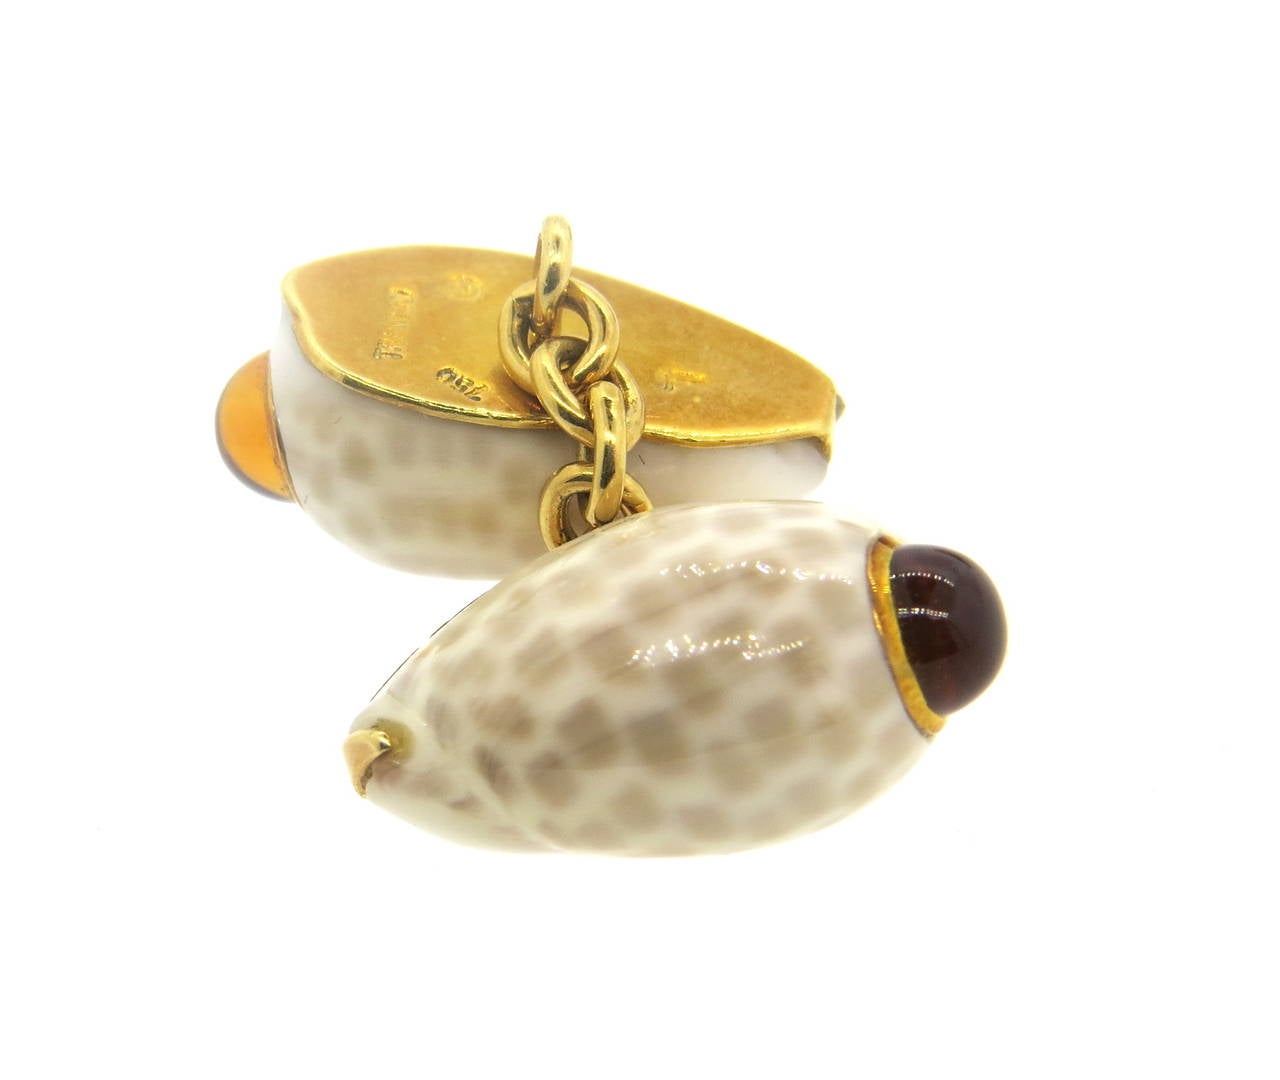 18k yellow gold cufflinks, crafted by Trianon, set with shell top and citrine cabochons. Each top measures 20mm x 11mm. Marked 750 and Trianon. Weight - 11.4 grams
Retail $3800